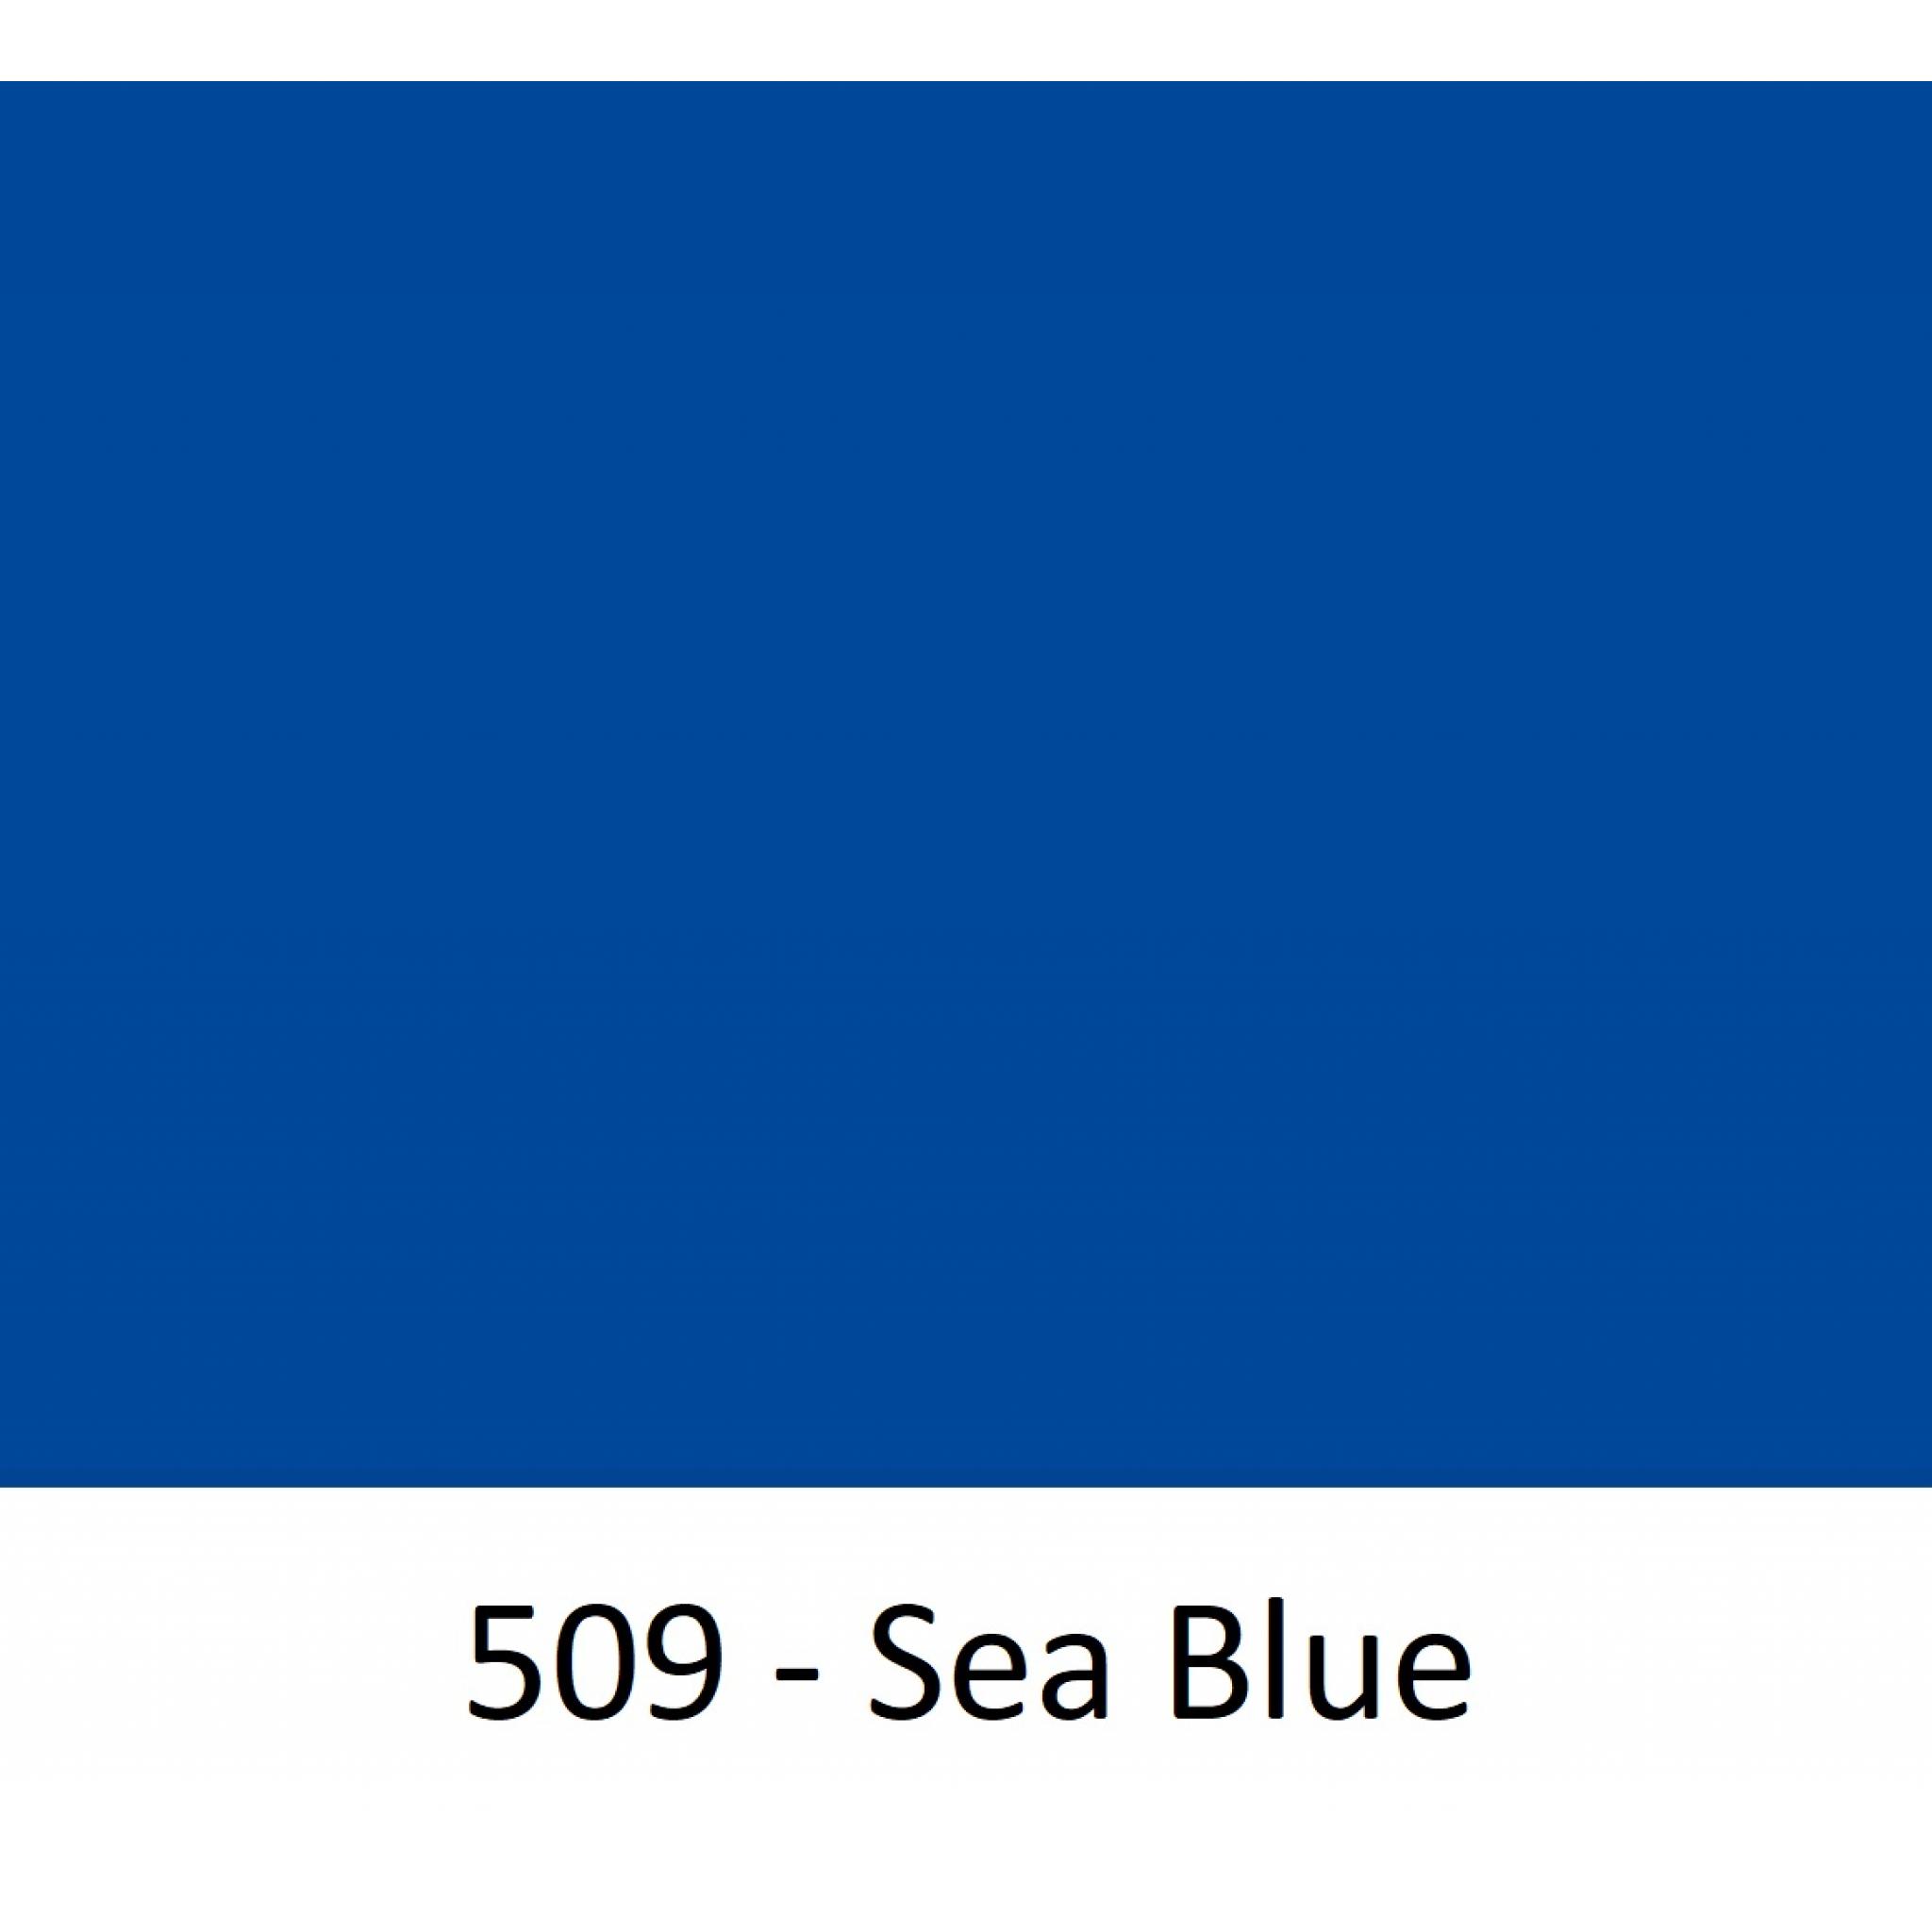 1520mm Wide Oracal 970 Rapid Air Premium Wrapping Cast Vinyl - Sea Blue 509